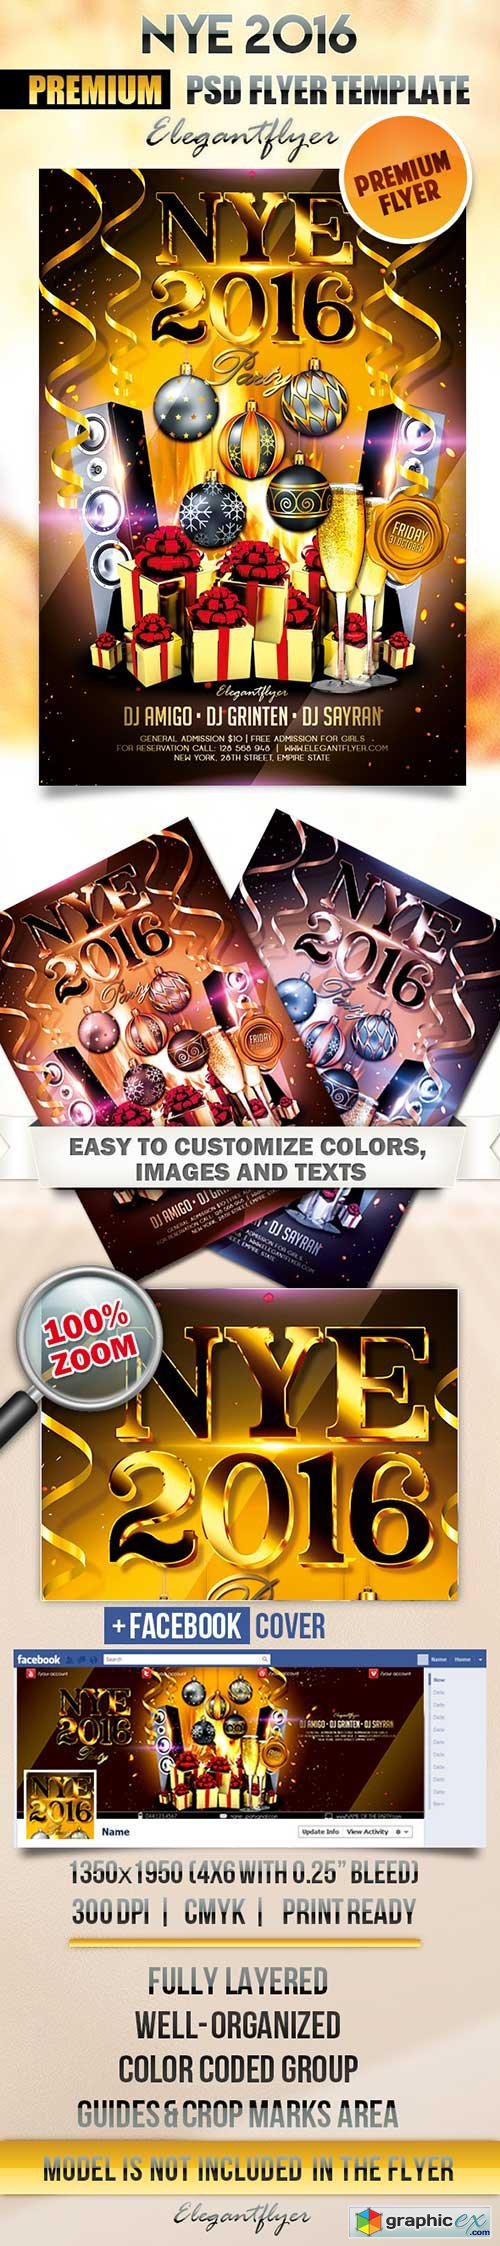 NYE 2016 Flyer PSD Template + Facebook Cover